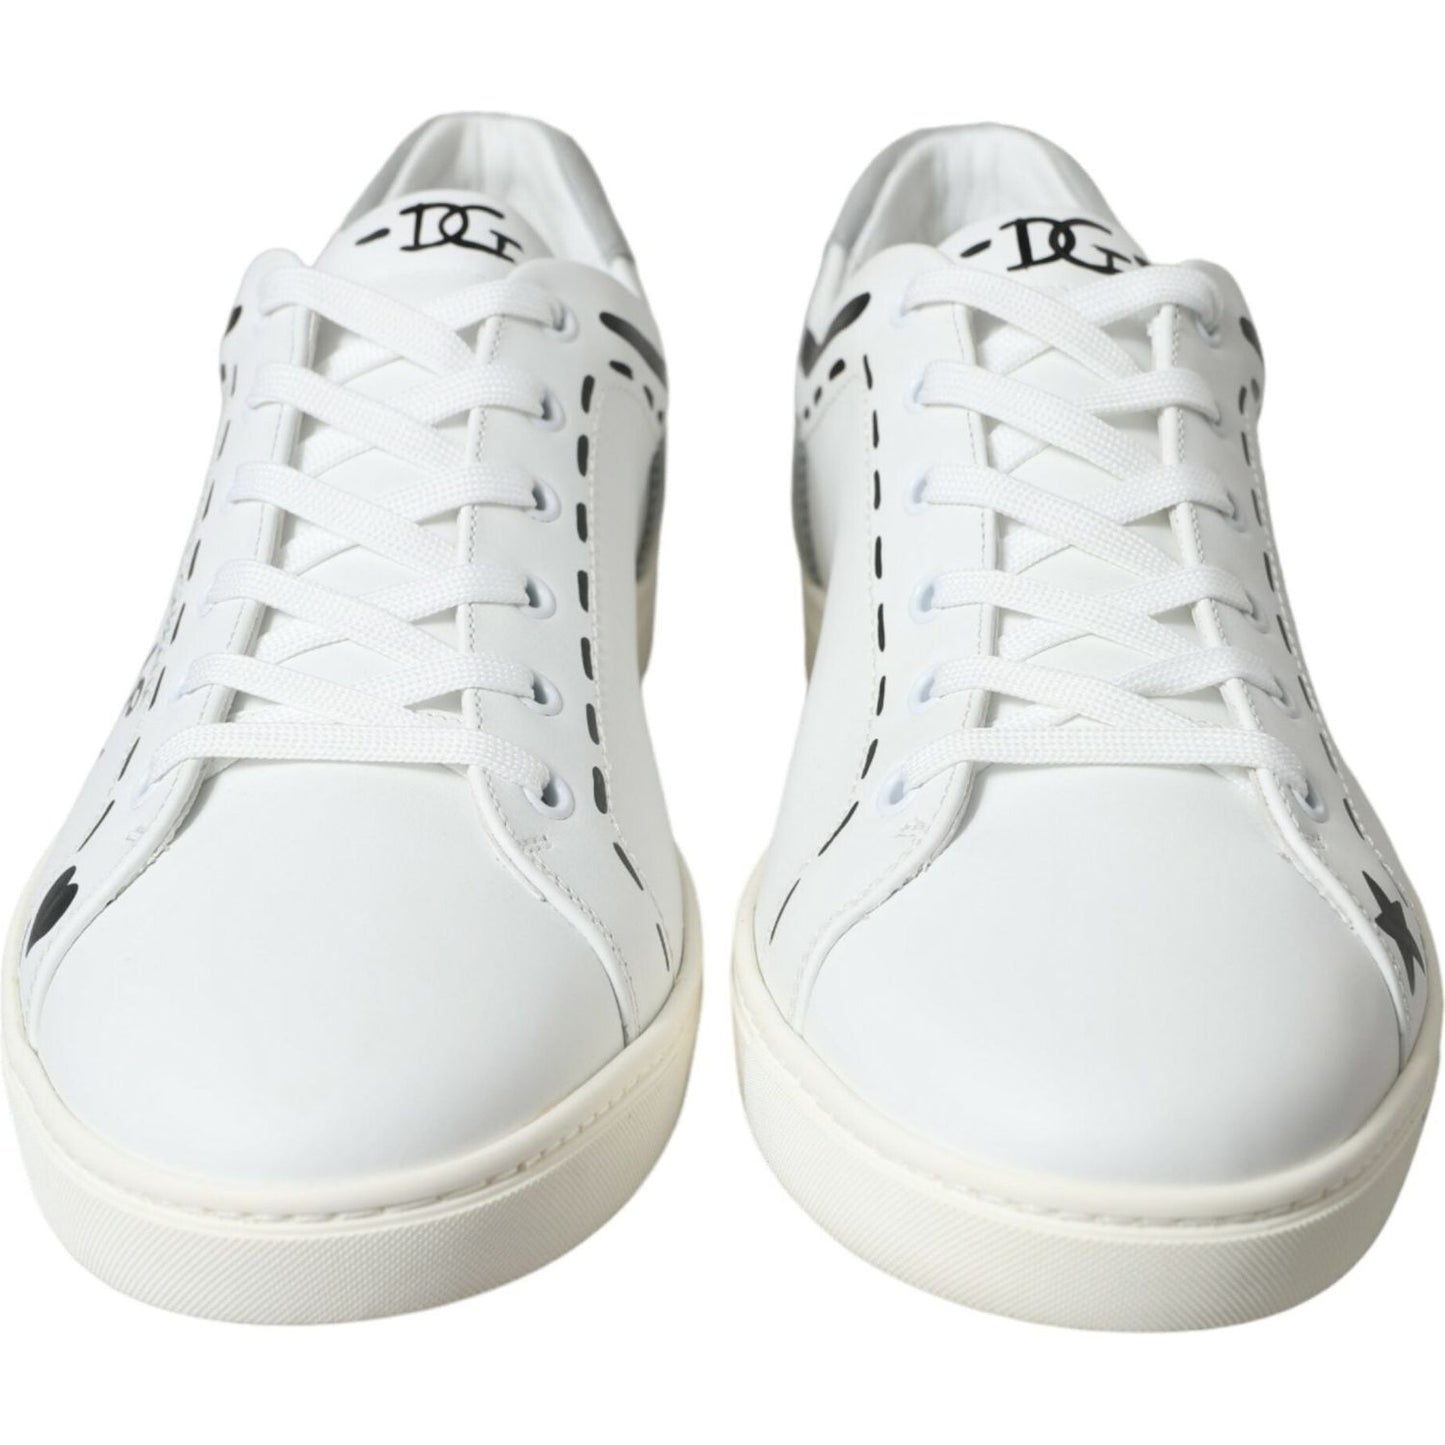 Dolce & Gabbana Elegant White Calfskin Leather Sneakers white-gray-leather-love-milano-sneakers-shoes